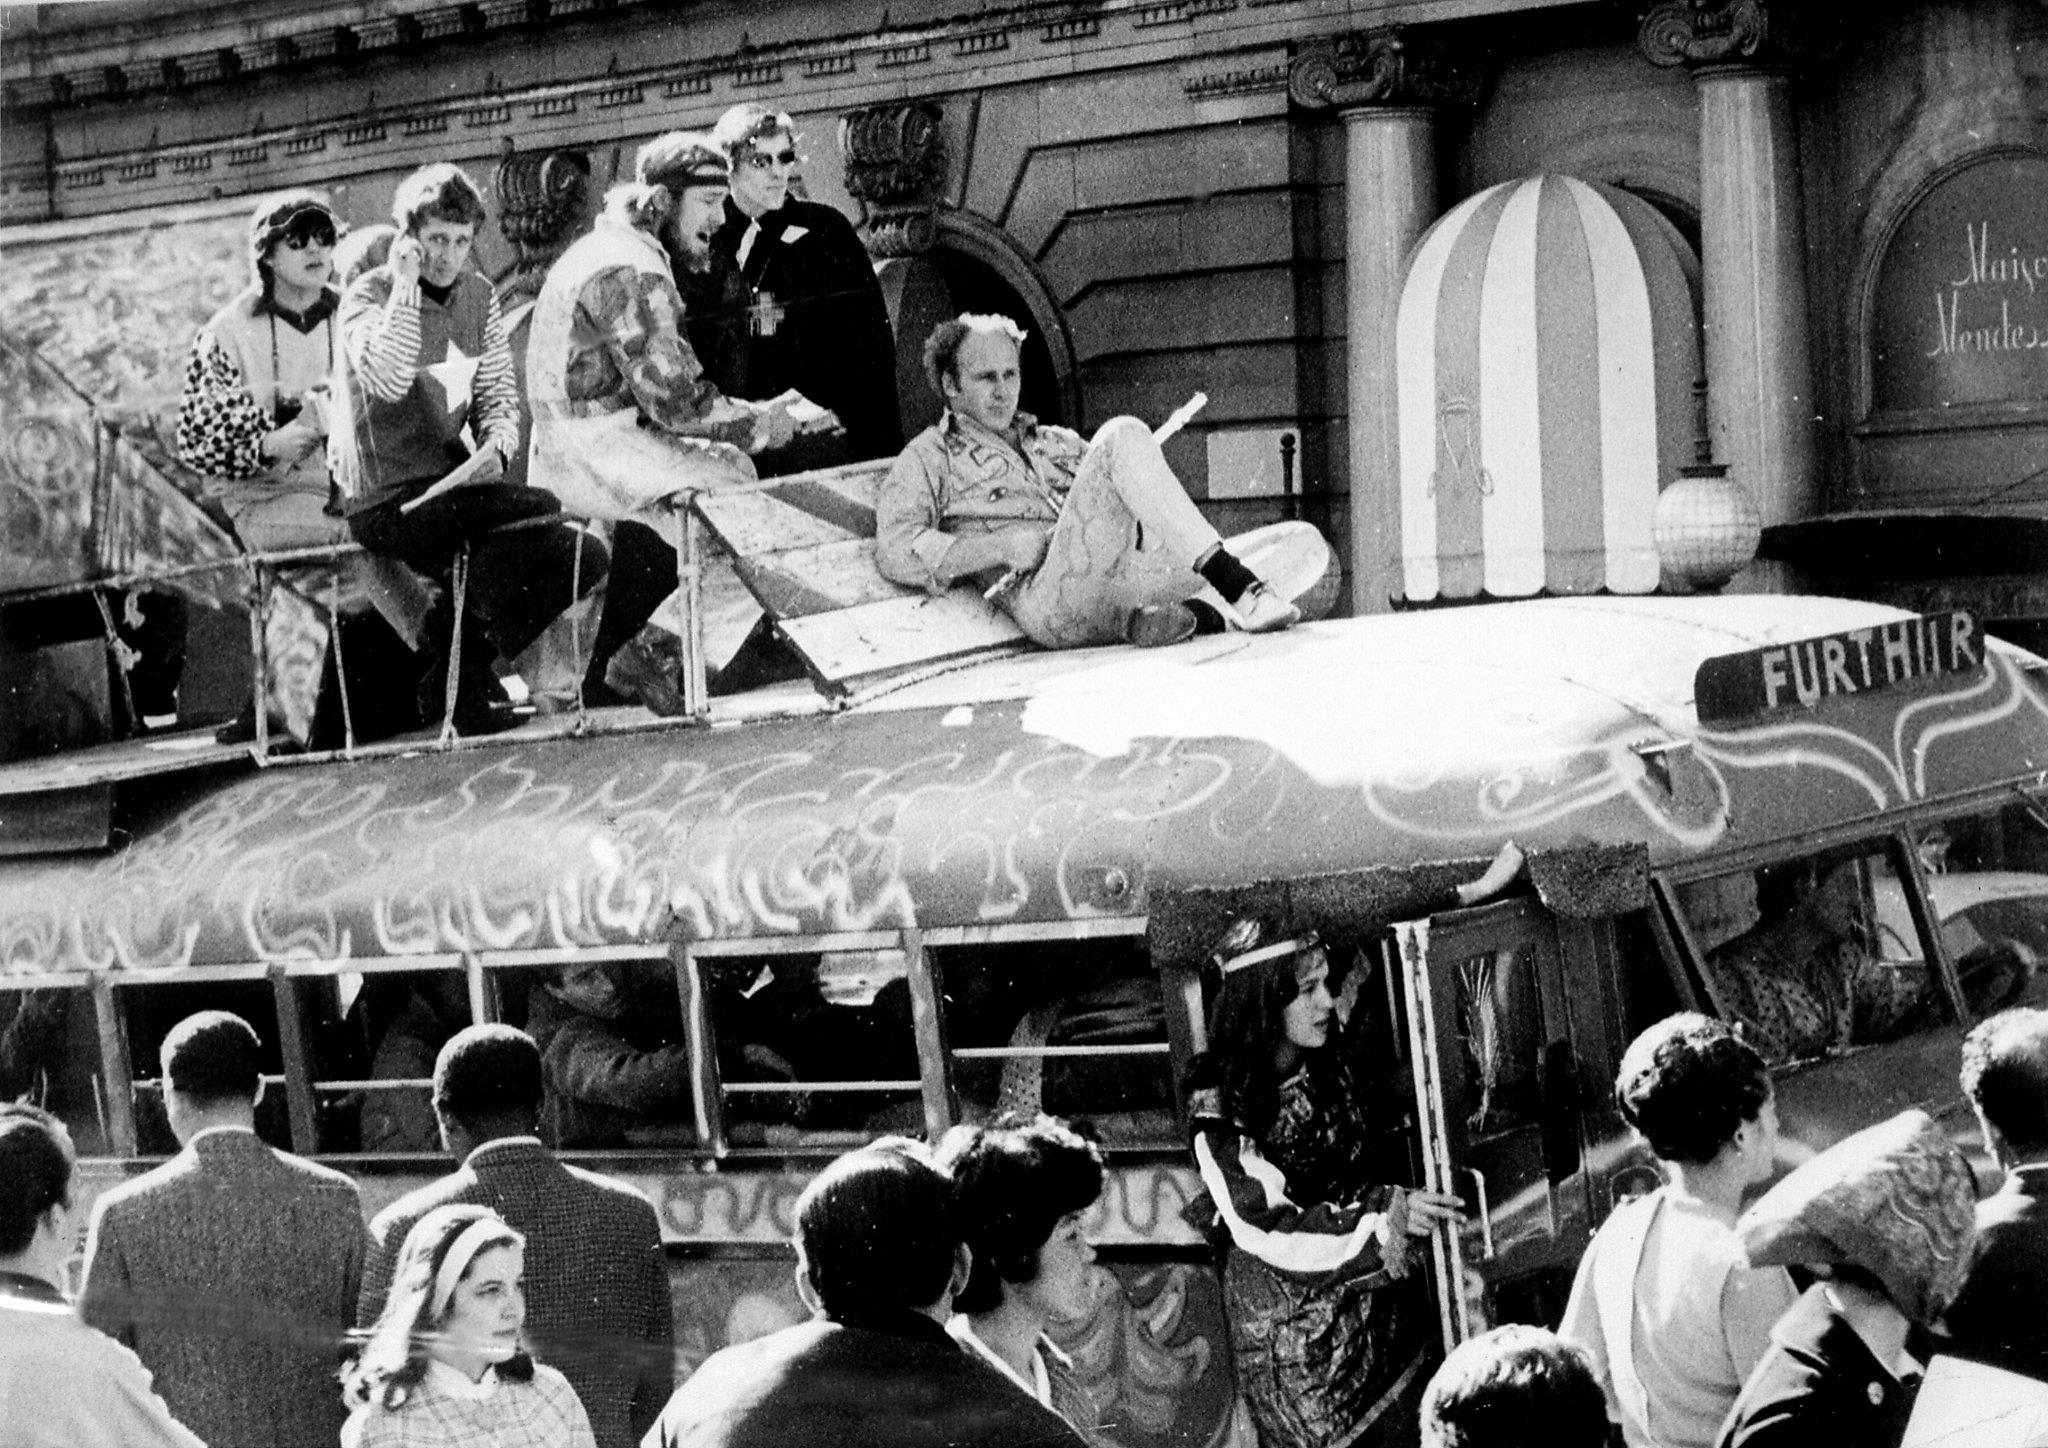 Ken Kesey vs. the cops: Looking back at author’s 1965 pot bust - San Francisco Chronicle